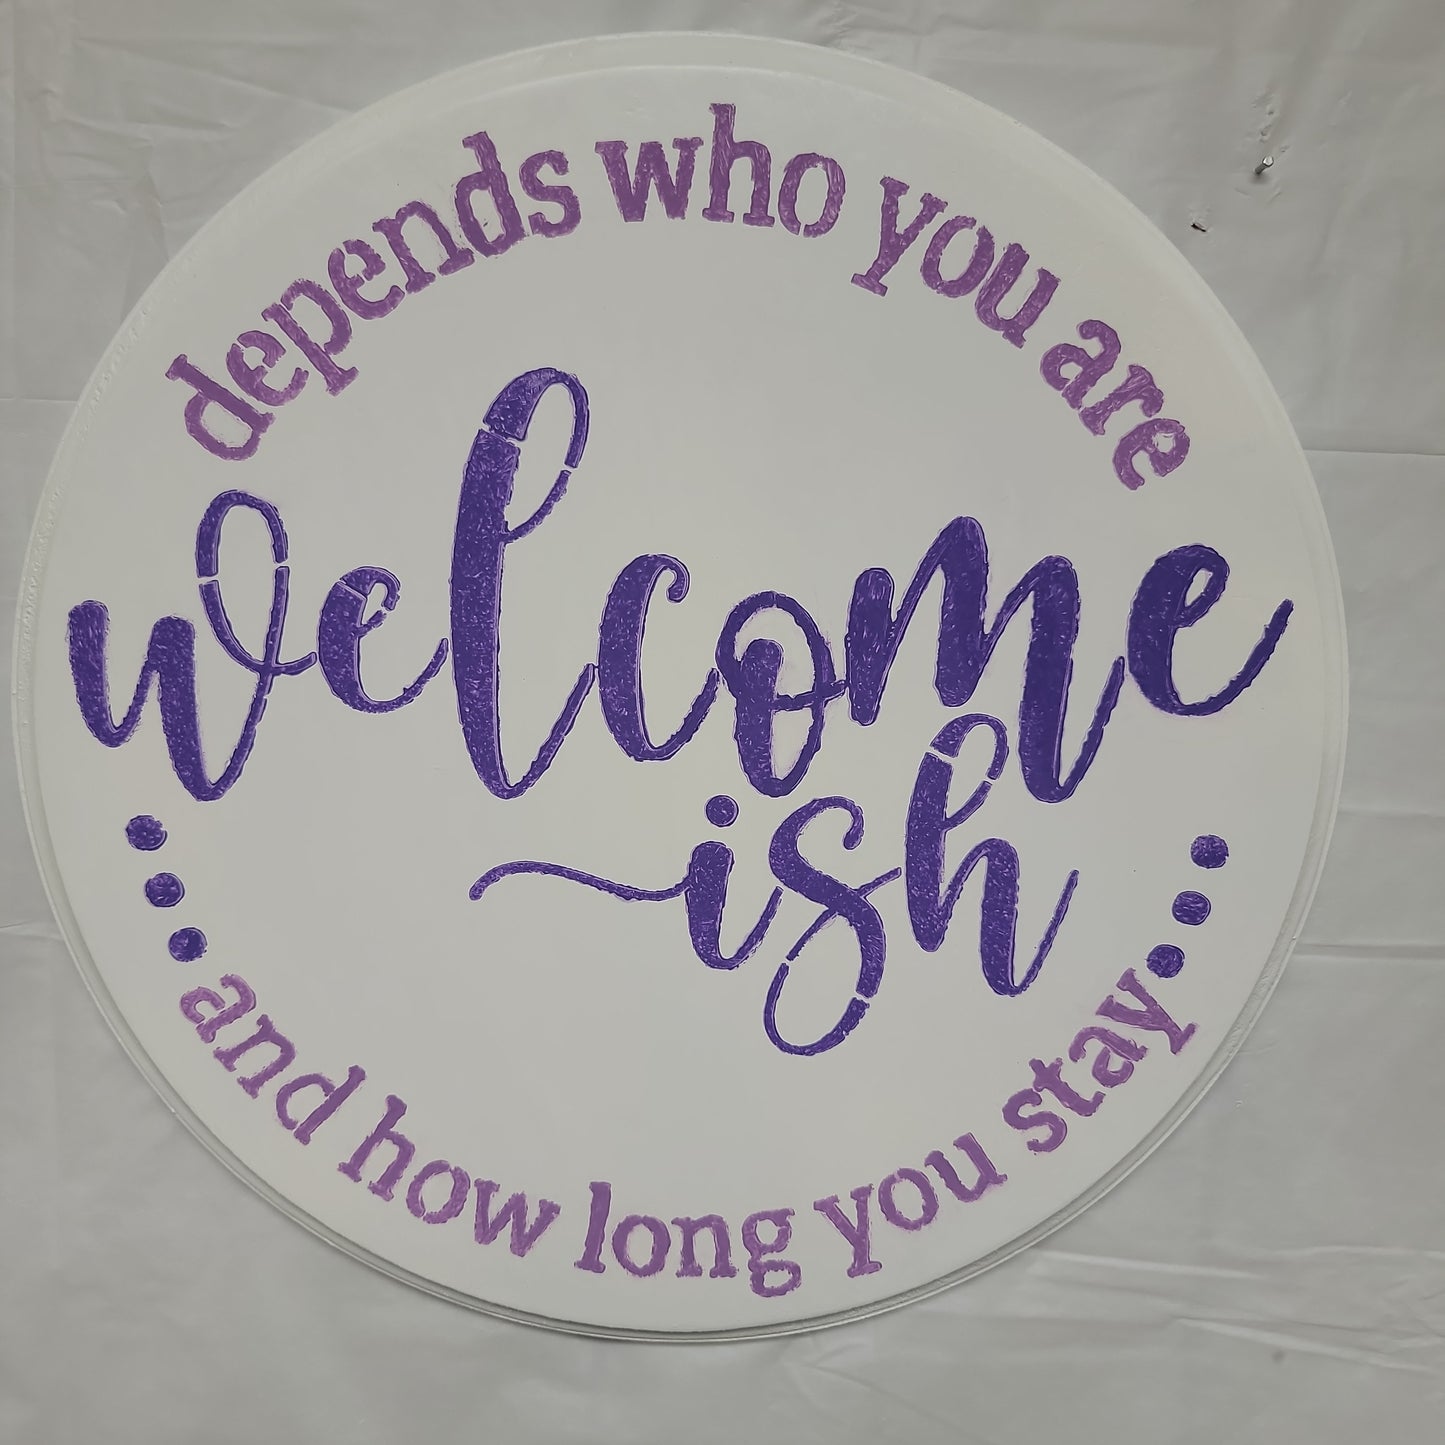 Welcome ish Depends who you are